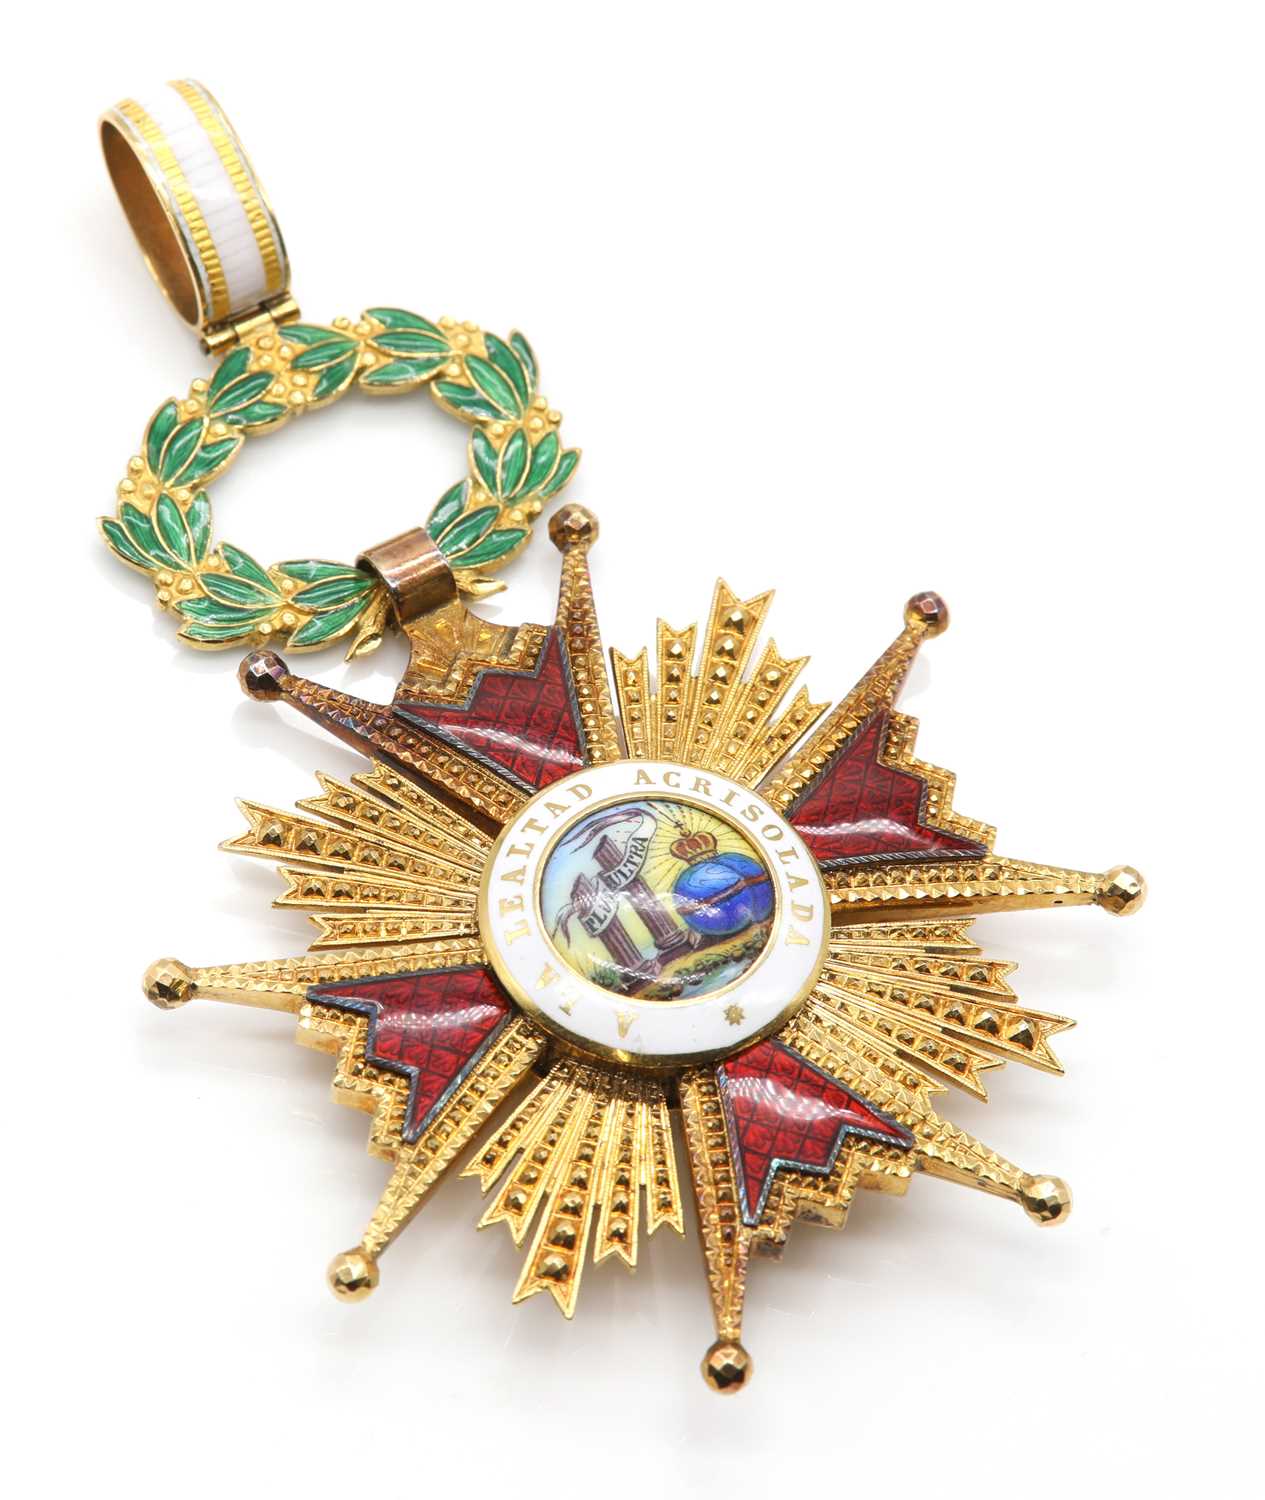 Lot 74 - An Order of Isabella the Catholic Grand Cross pendant